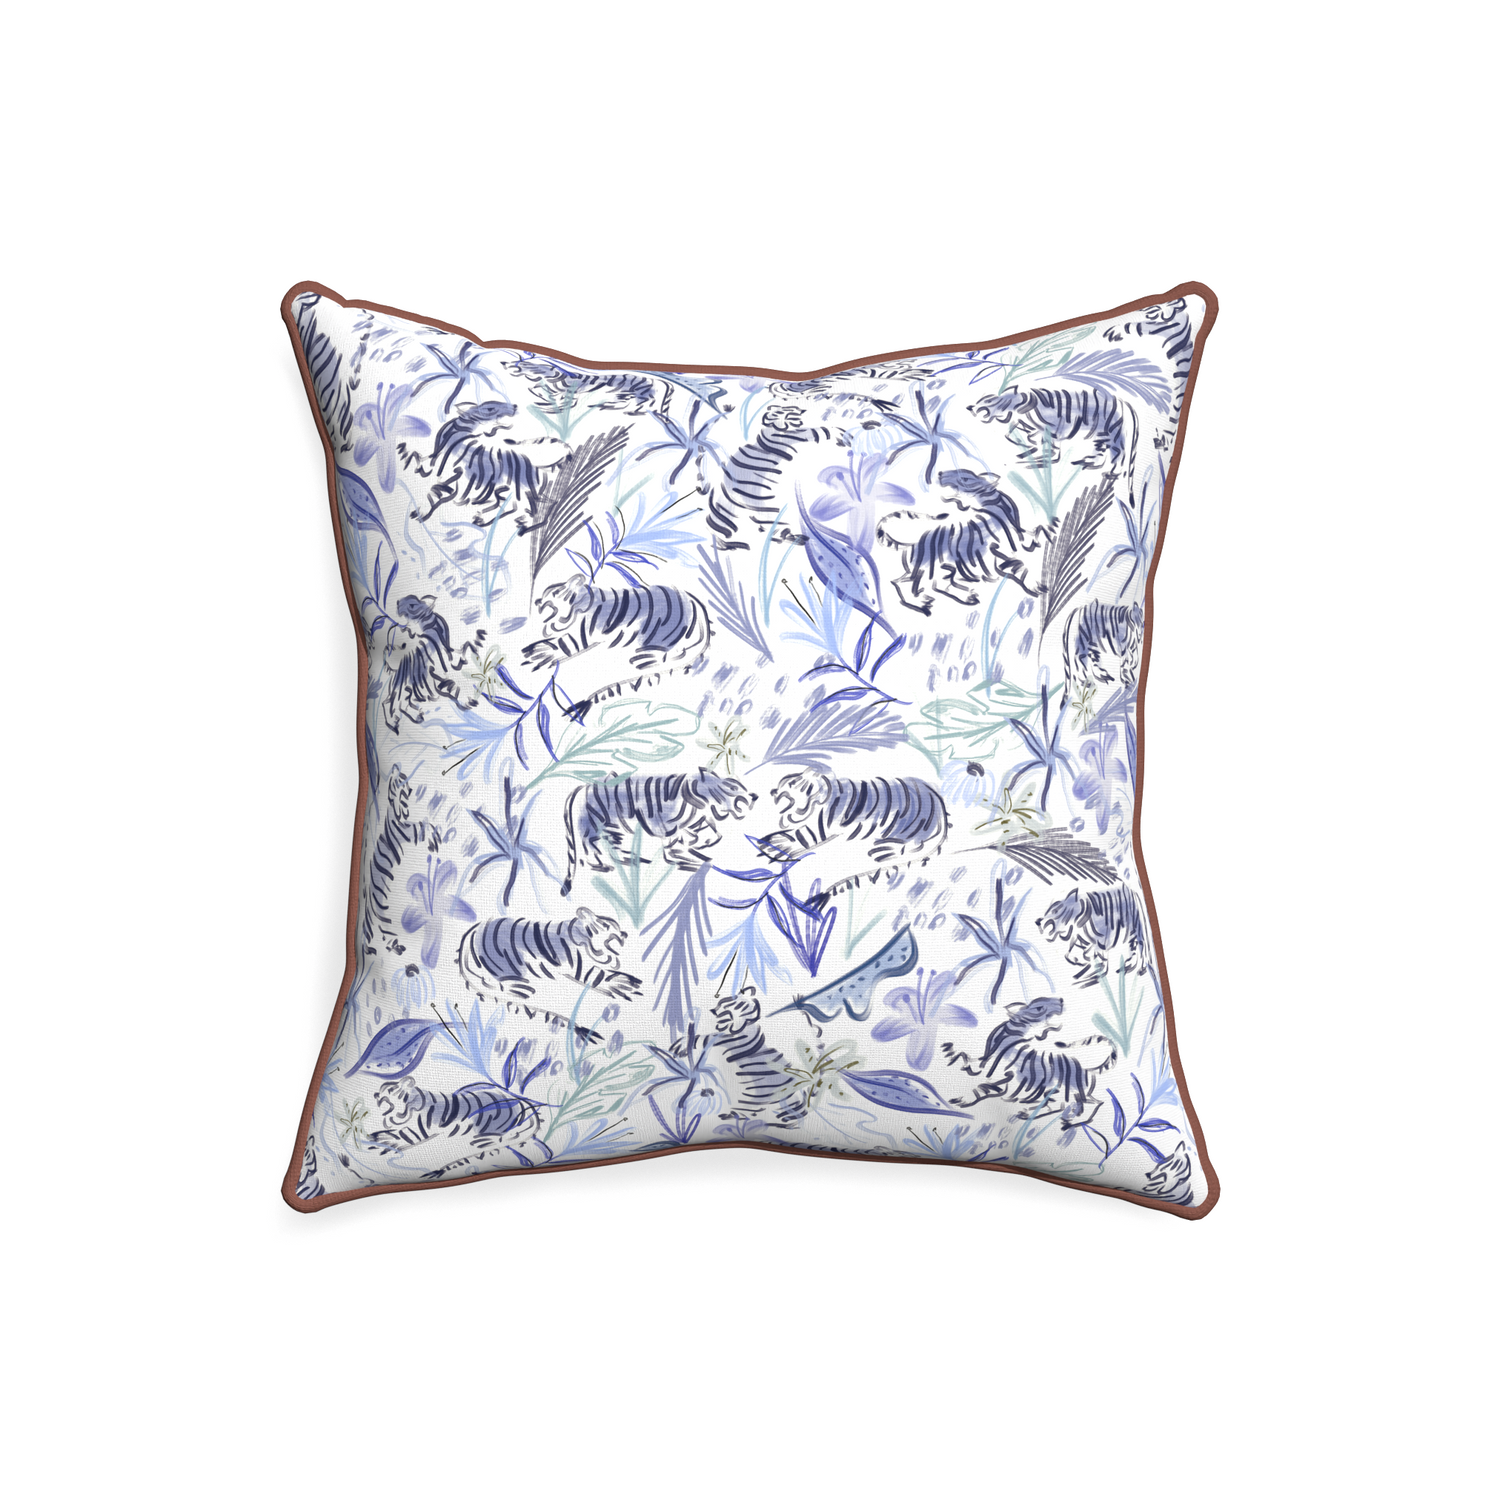 20-square frida blue custom blue with intricate tiger designpillow with w piping on white background